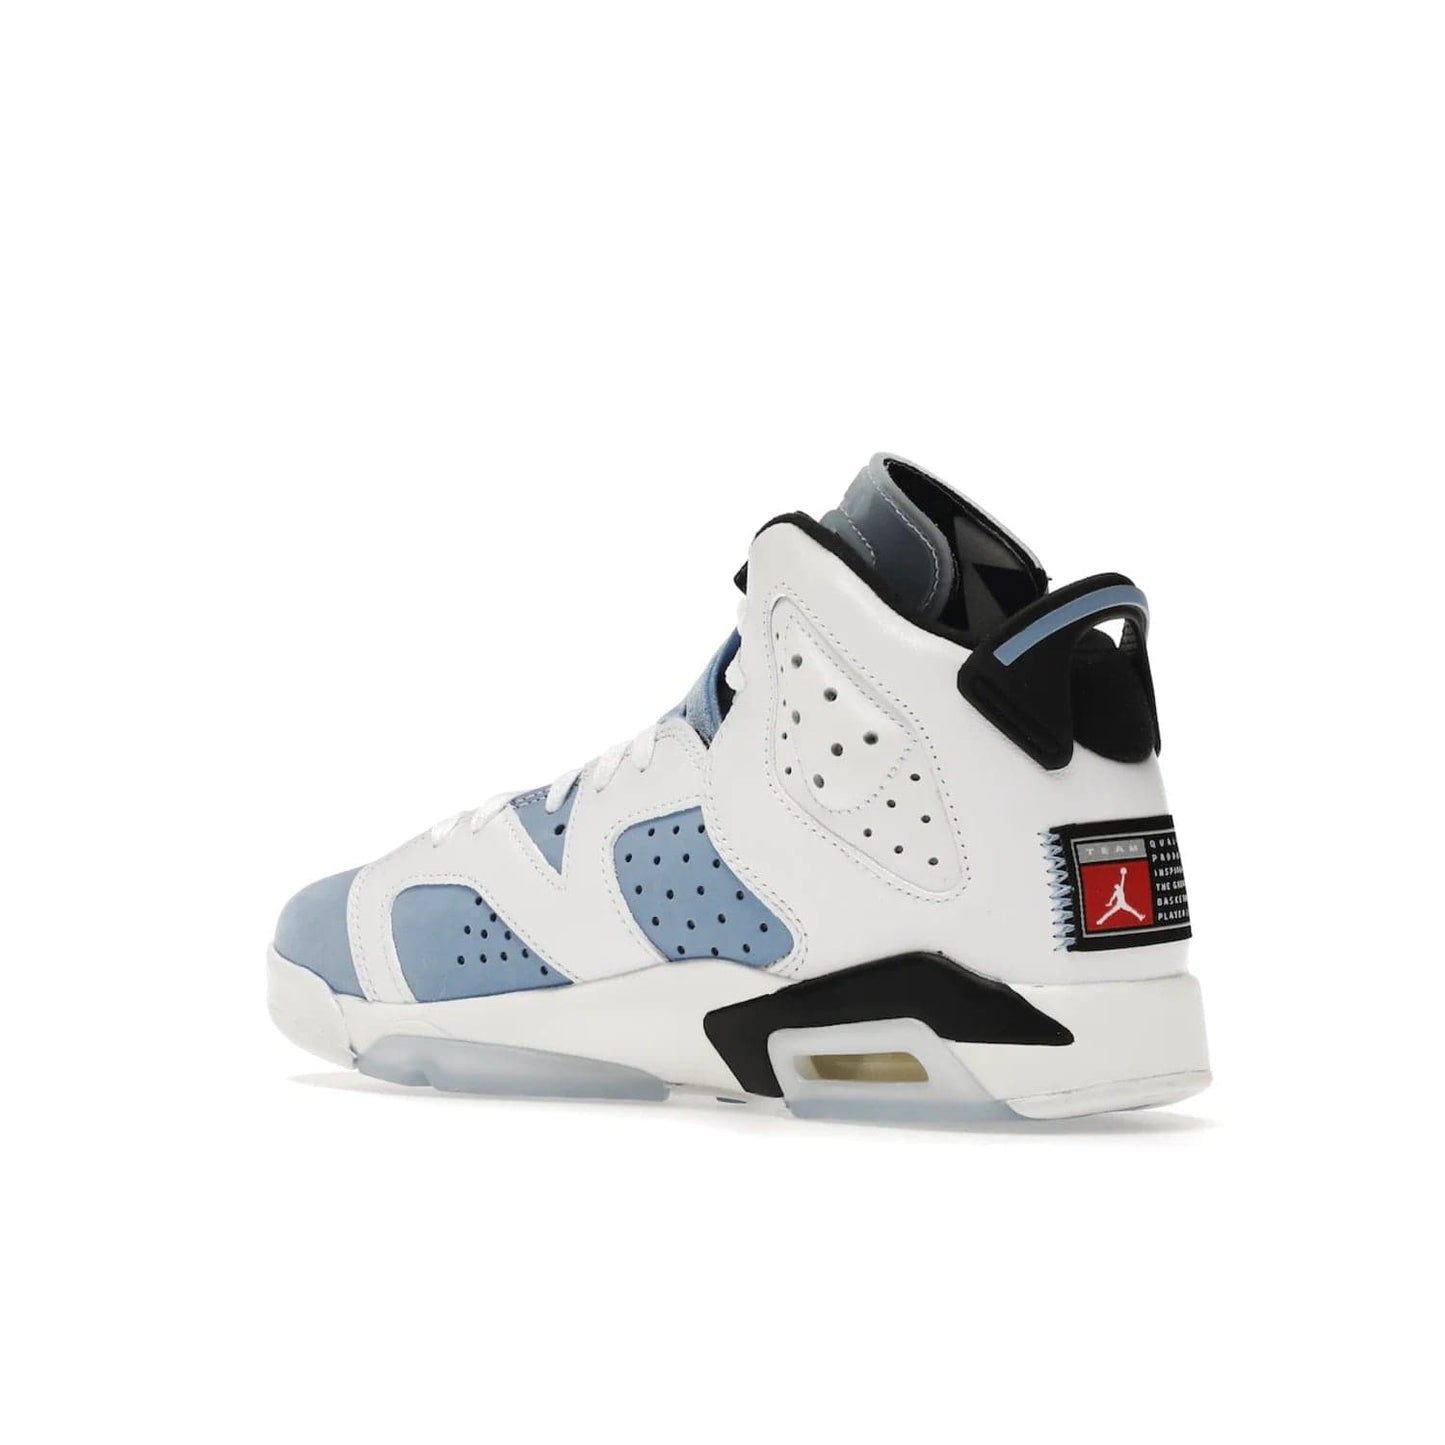 Jordan 6 Retro UNC White (GS) - Image 23 - Only at www.BallersClubKickz.com - Air Jordan 6 Retro UNC White GS: Michael Jordan alma mater, UNC Tar Heels, featuring colorway, nubuck, leather, Jumpman branding and a visible Air unit. Translucent blue/white outsole, perfect for completing sneaker rotation.